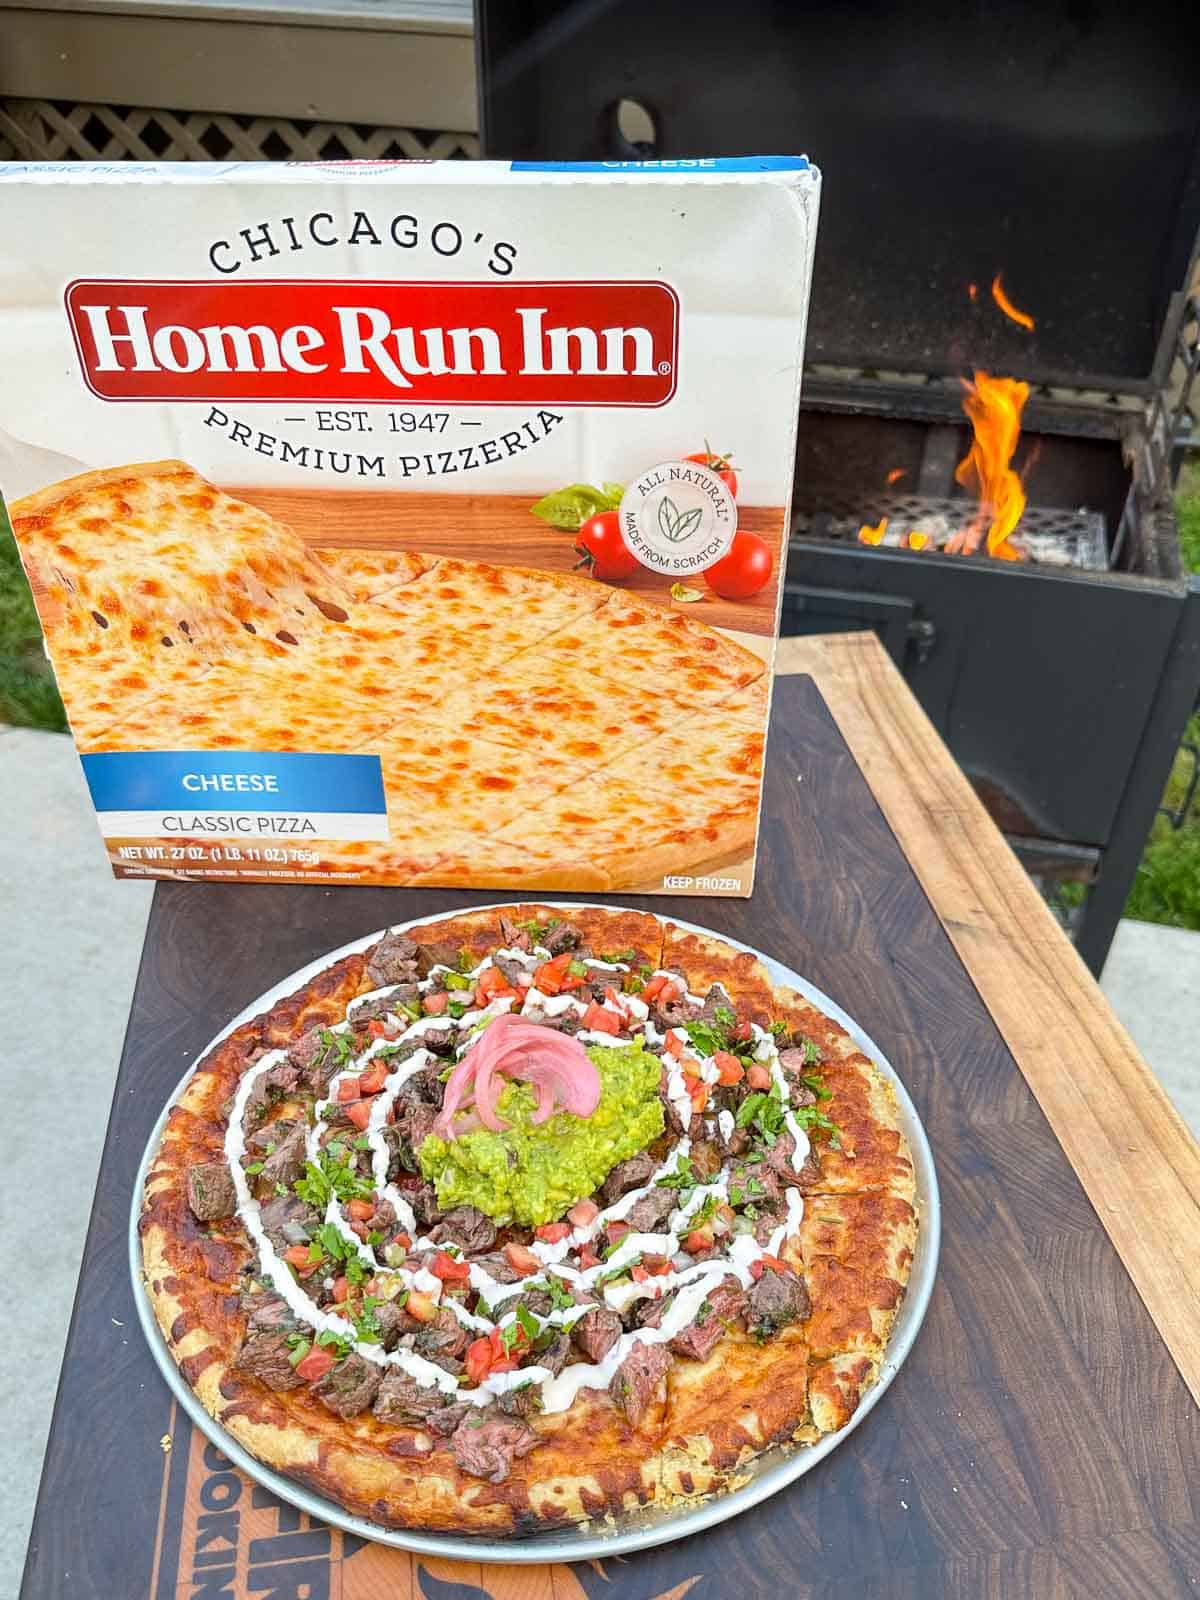 The finished carne asada pizza with a Home Run Inn box in the back so you can see what type of pizza we used.